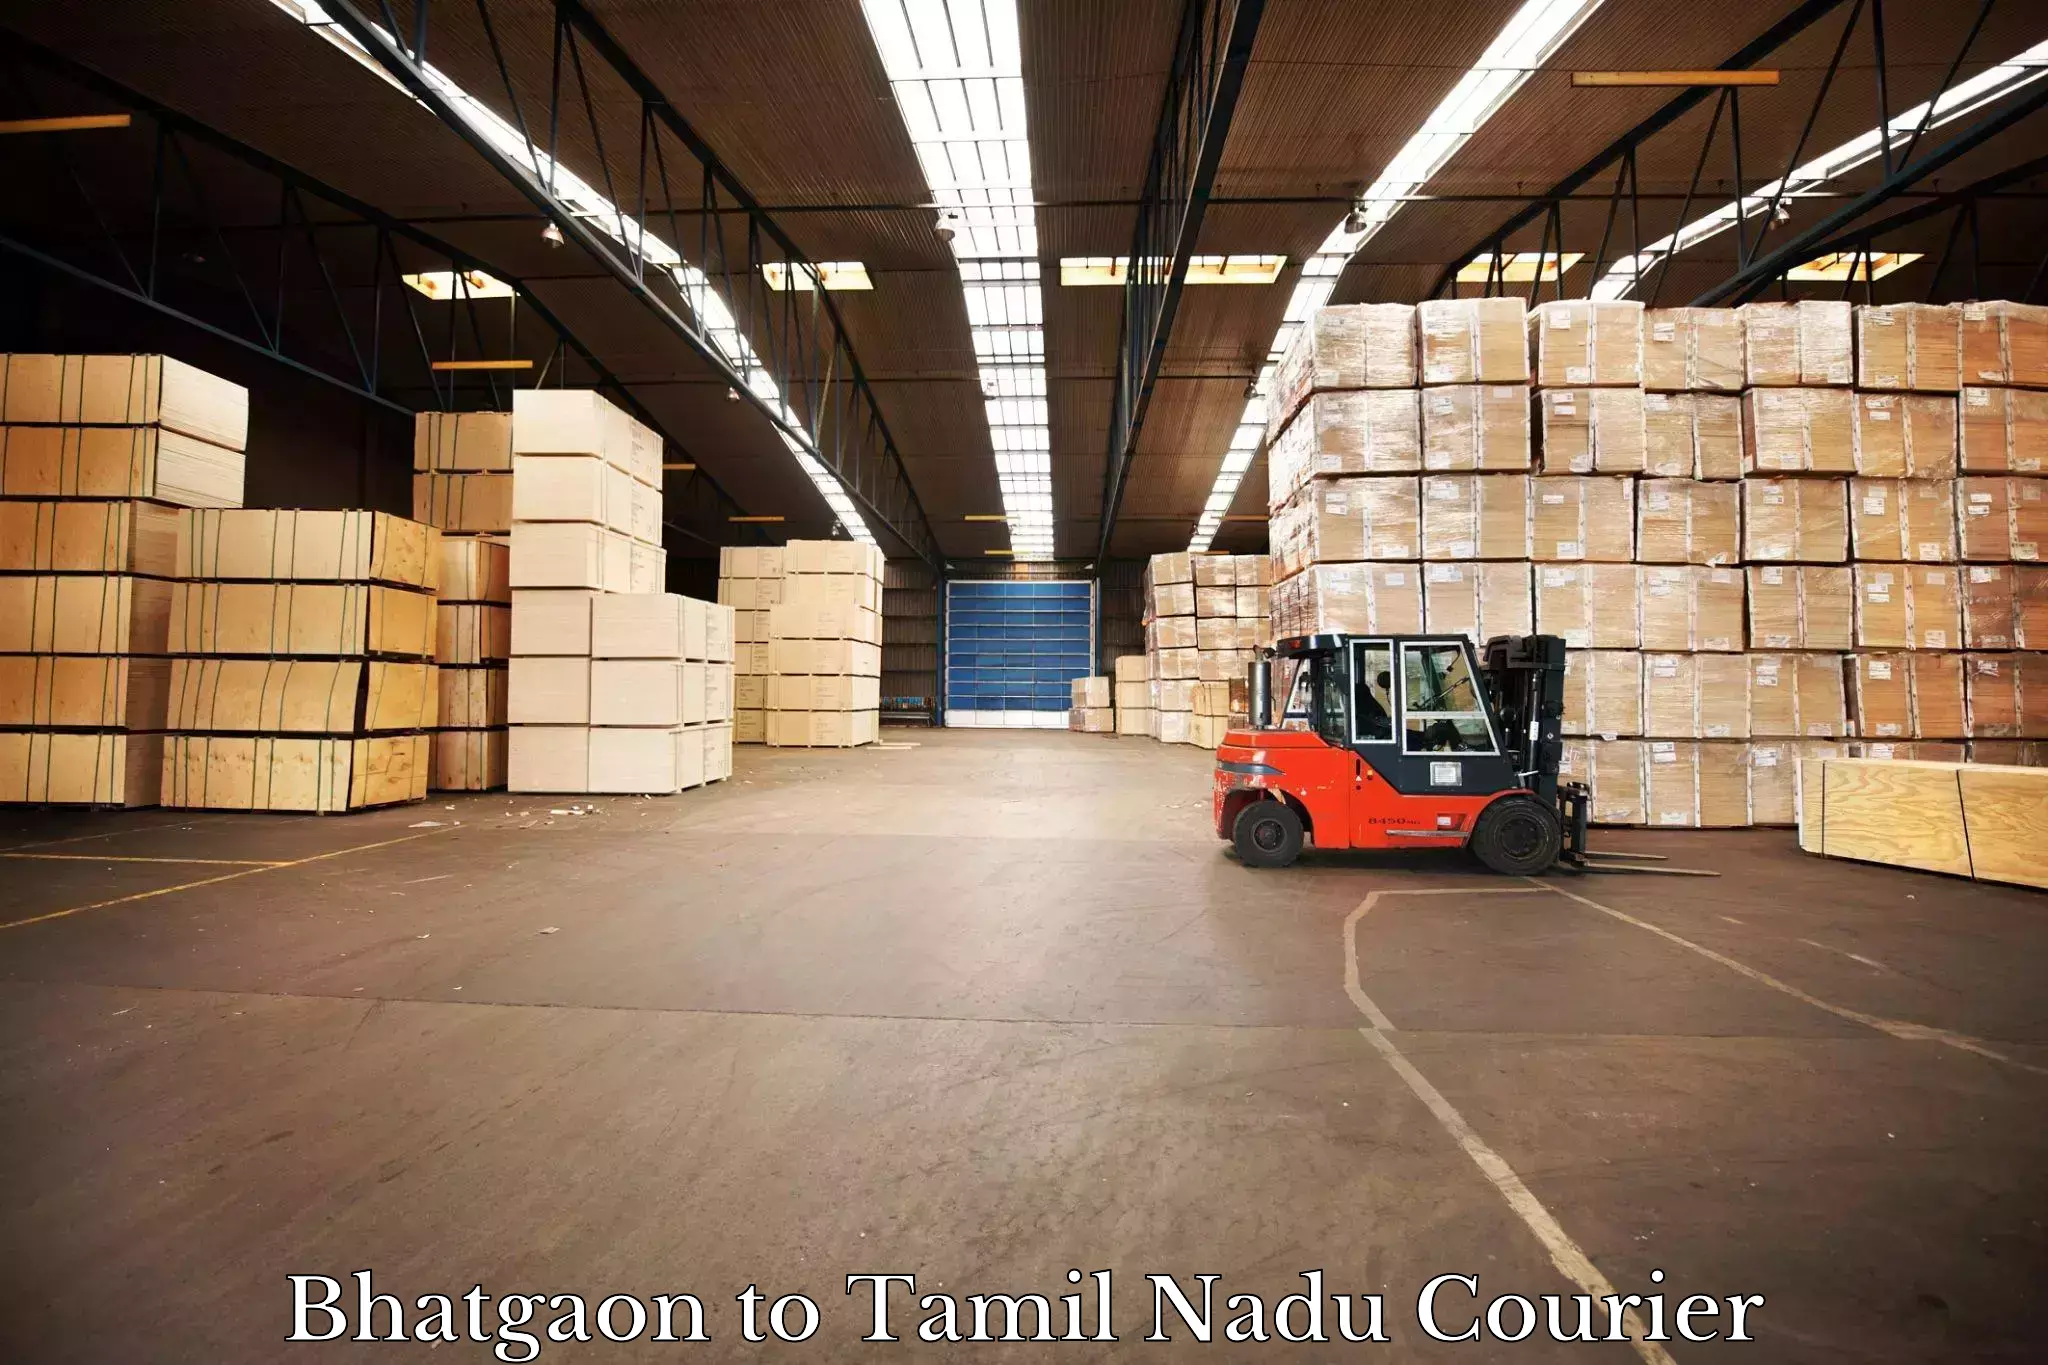 Express courier capabilities in Bhatgaon to Mayiladuthurai